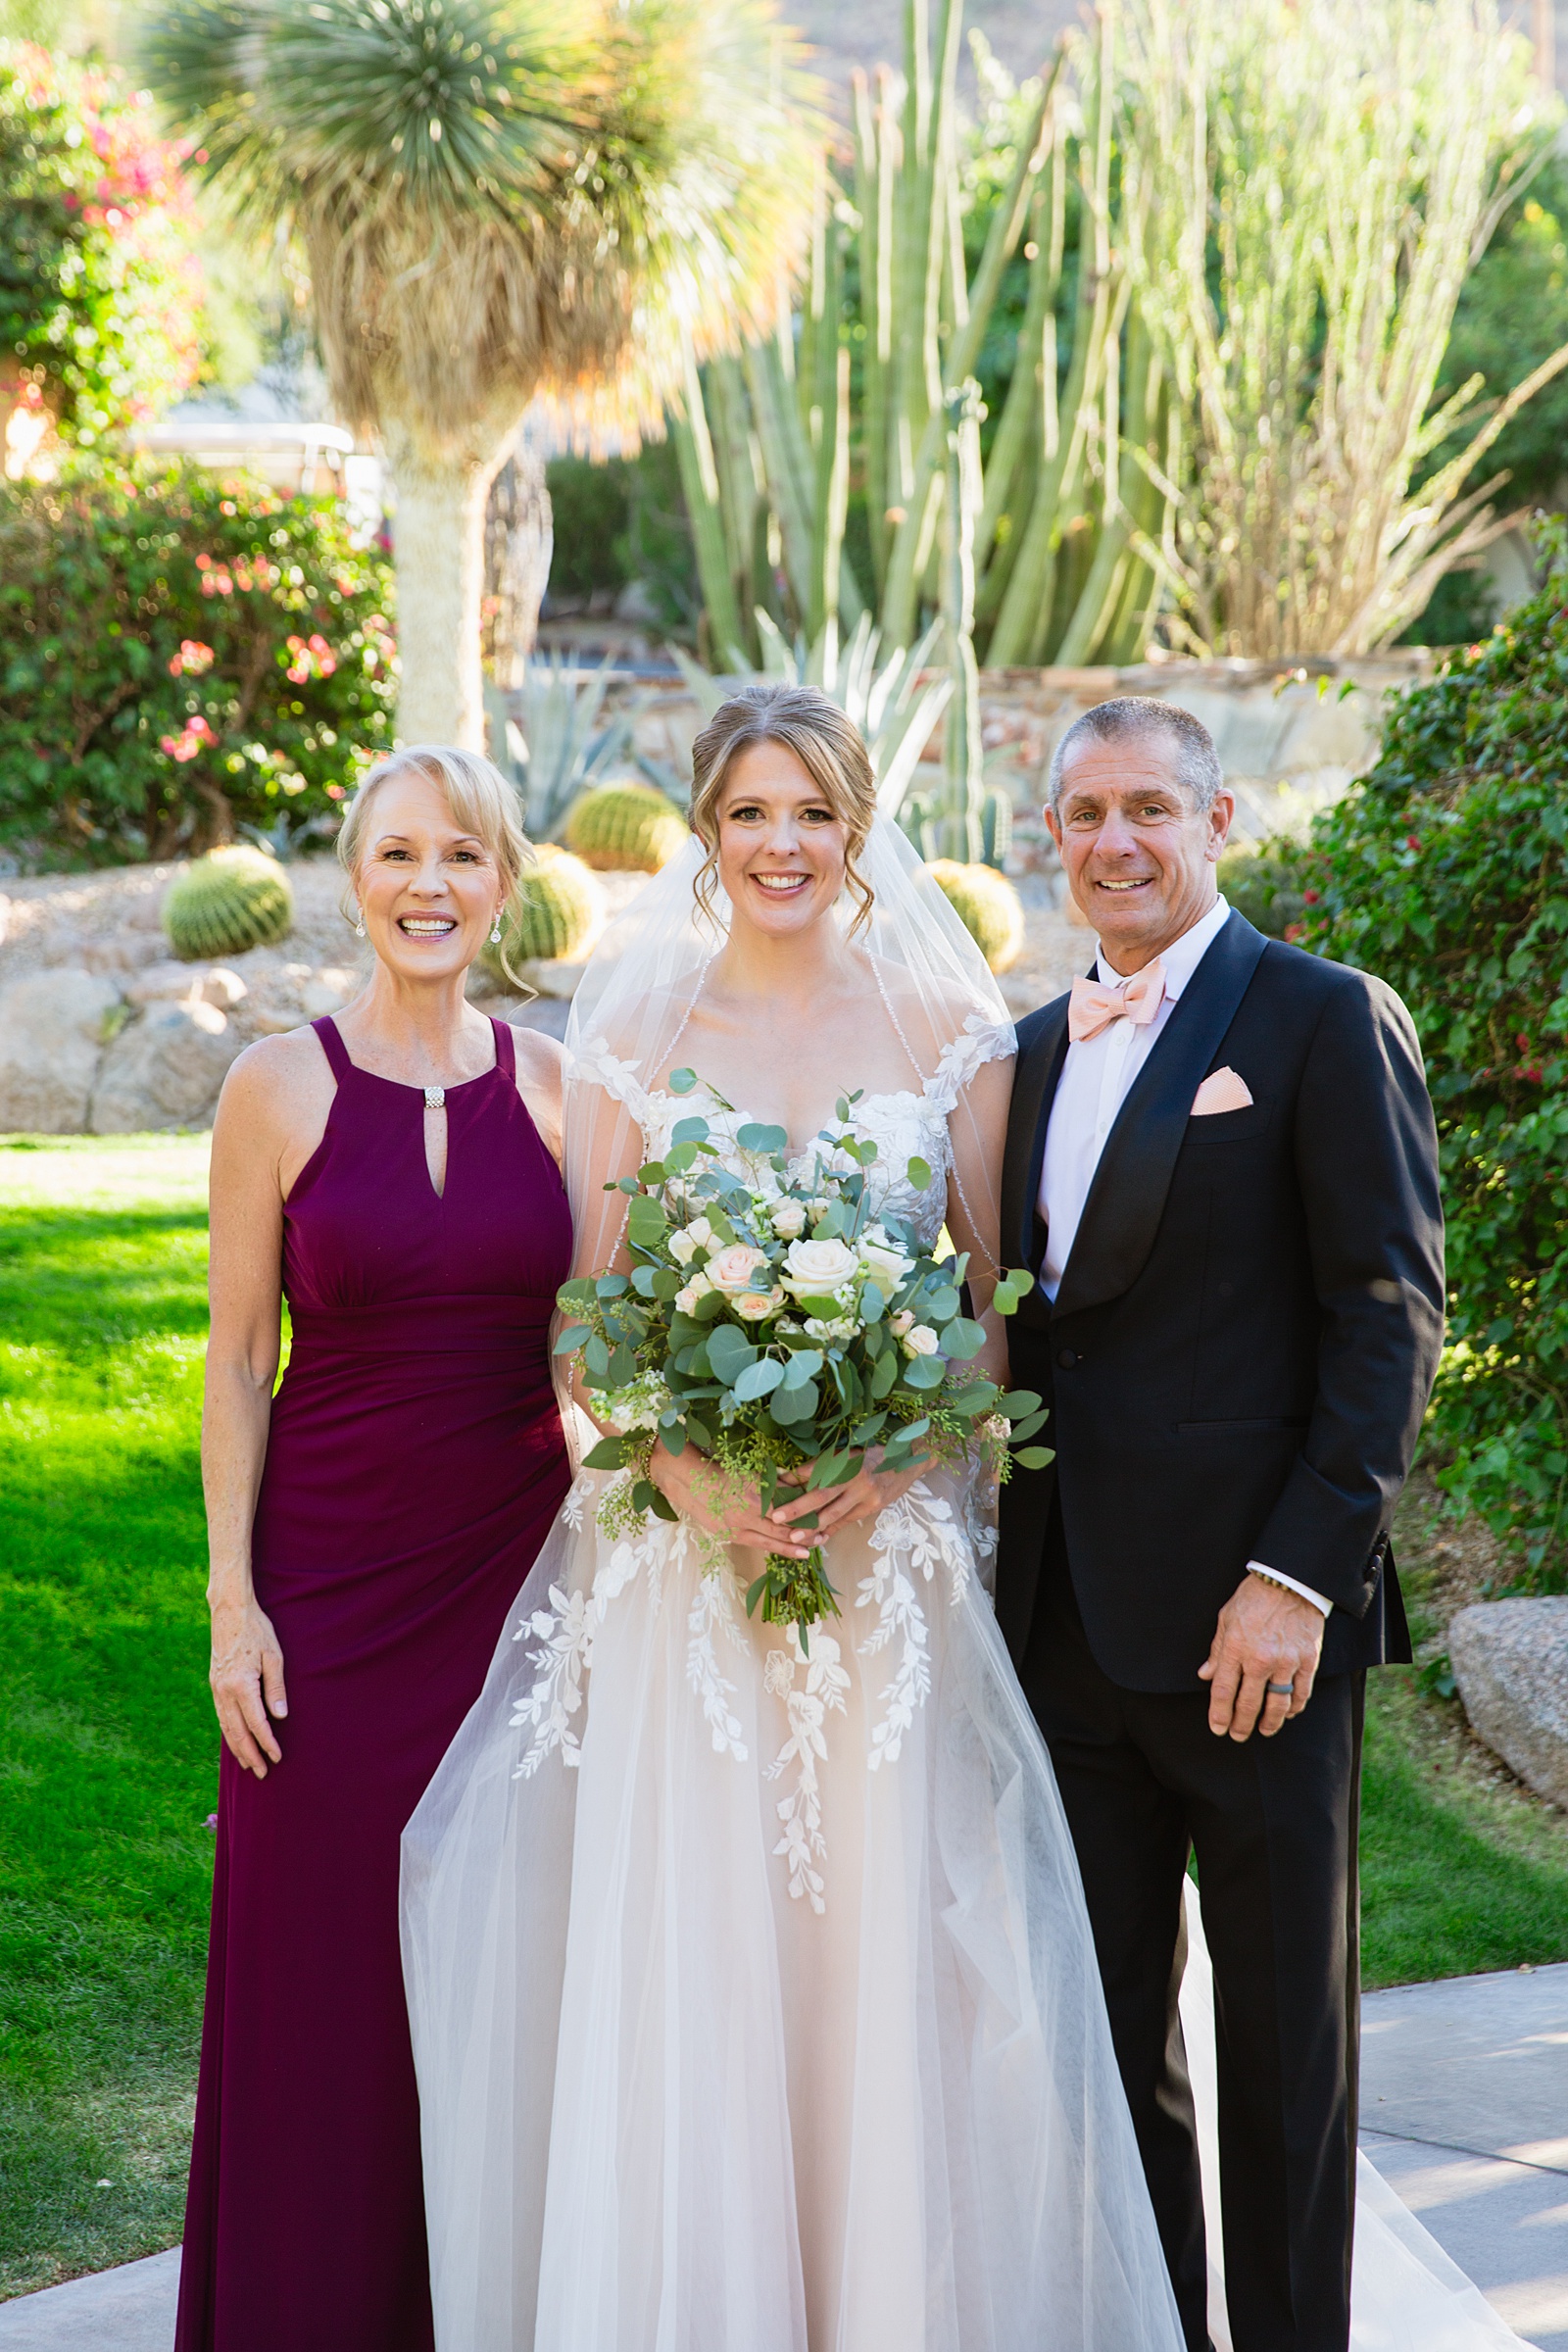 Family portraits at Sanctuary at Camelback by Juniper and Co Photography.